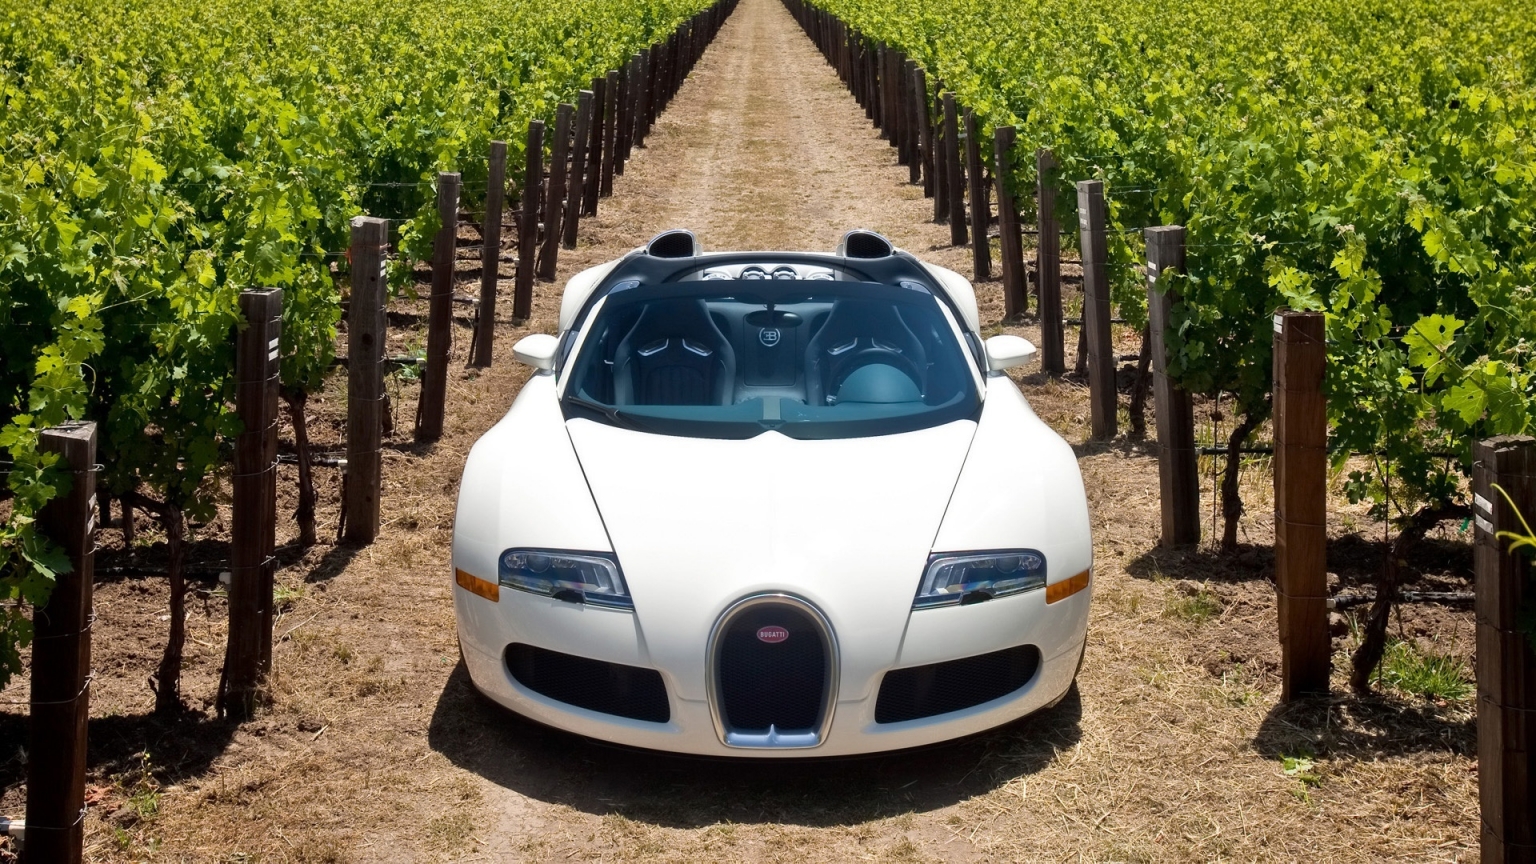 Bugatti Veyron 16.4 Grand Sport 2010 in Napa Valley - Front 2 for 1536 x 864 HDTV resolution